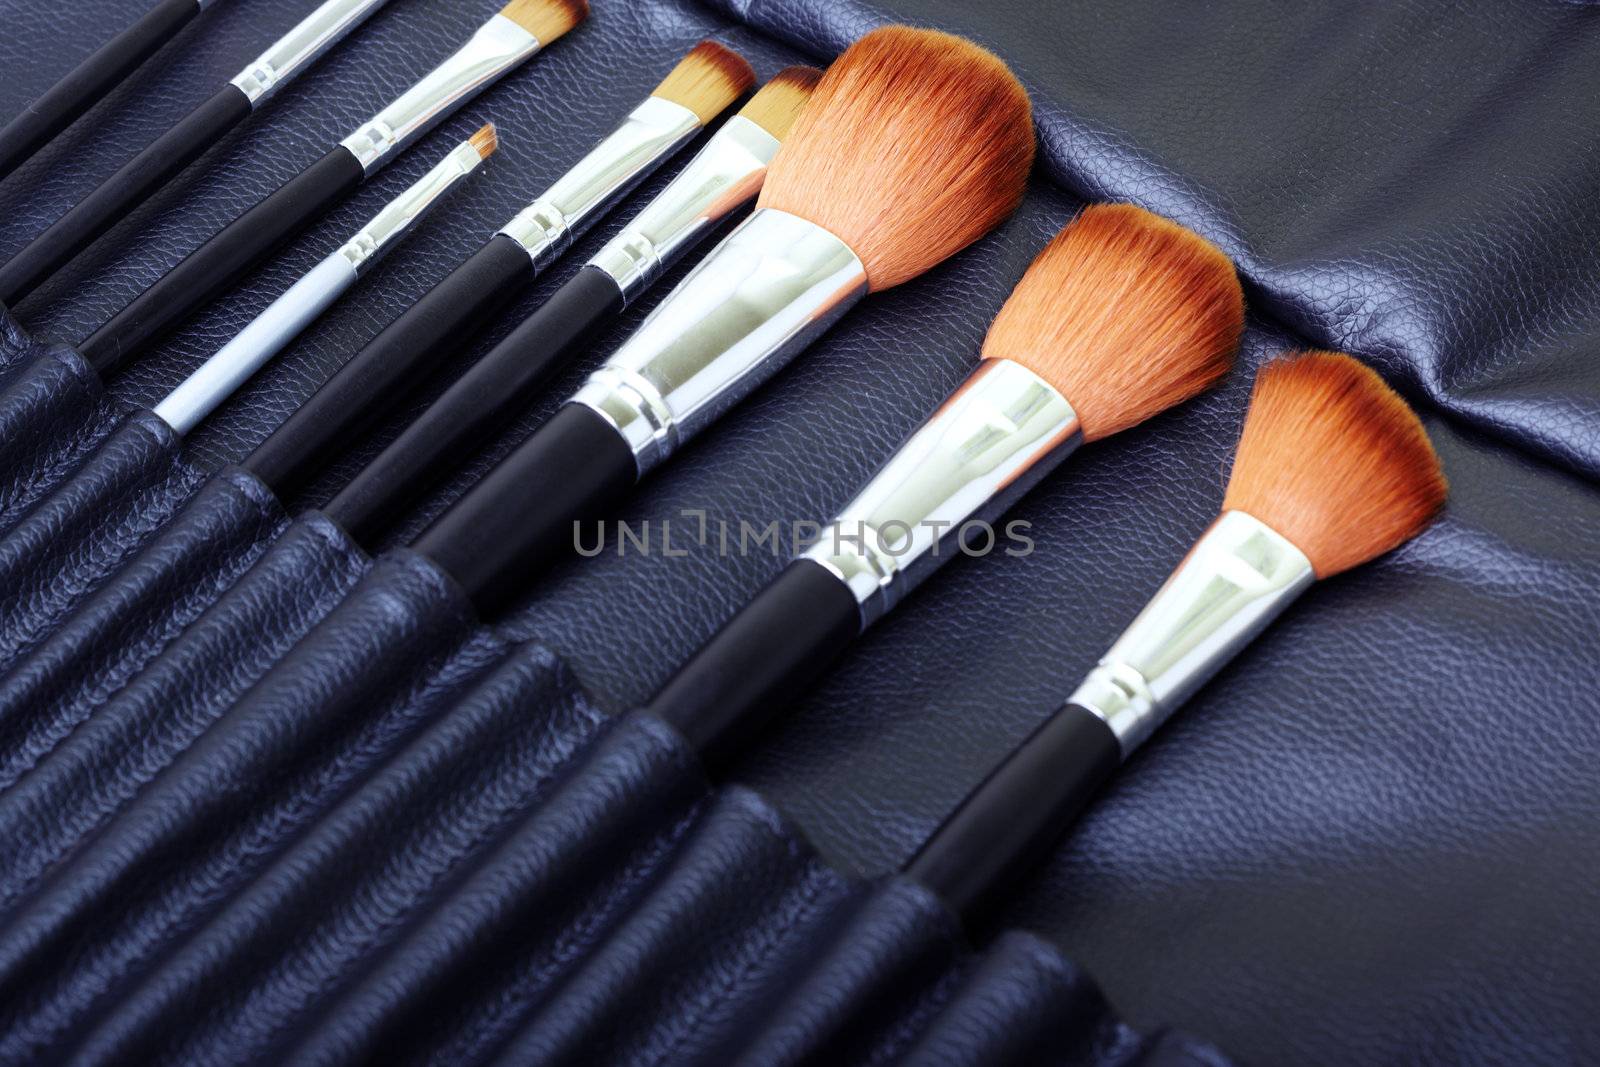 Close-up photo of the professional makeup brush set with leather cover